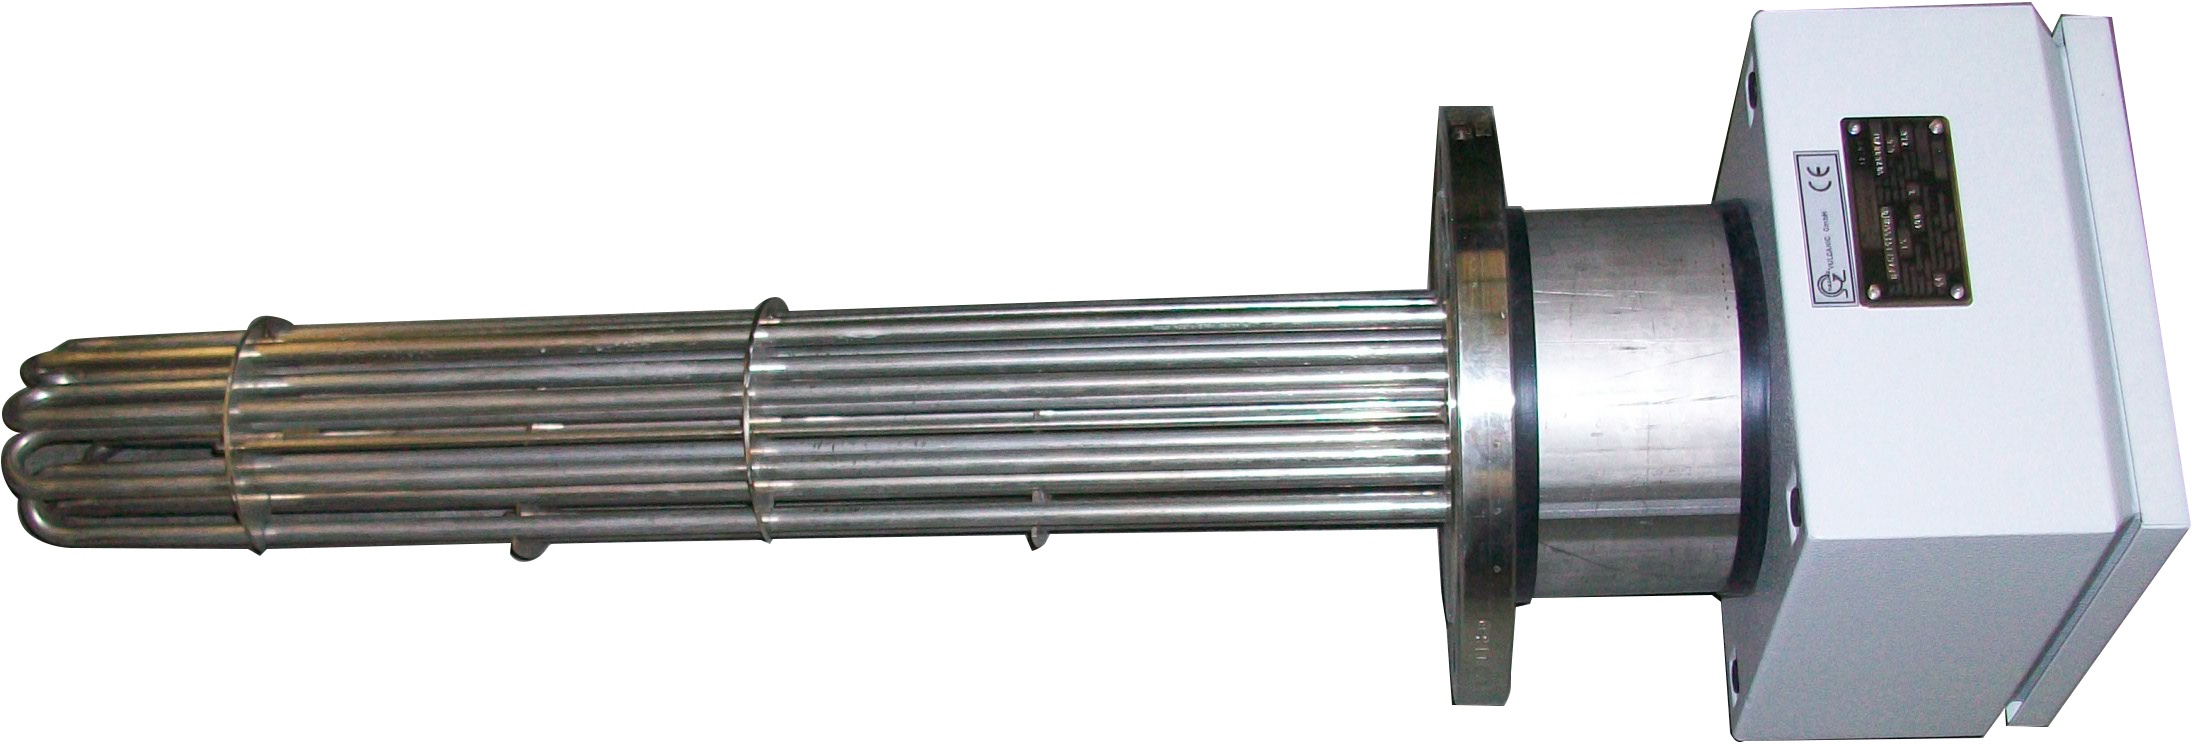 Flange immersion heaters - Cetal